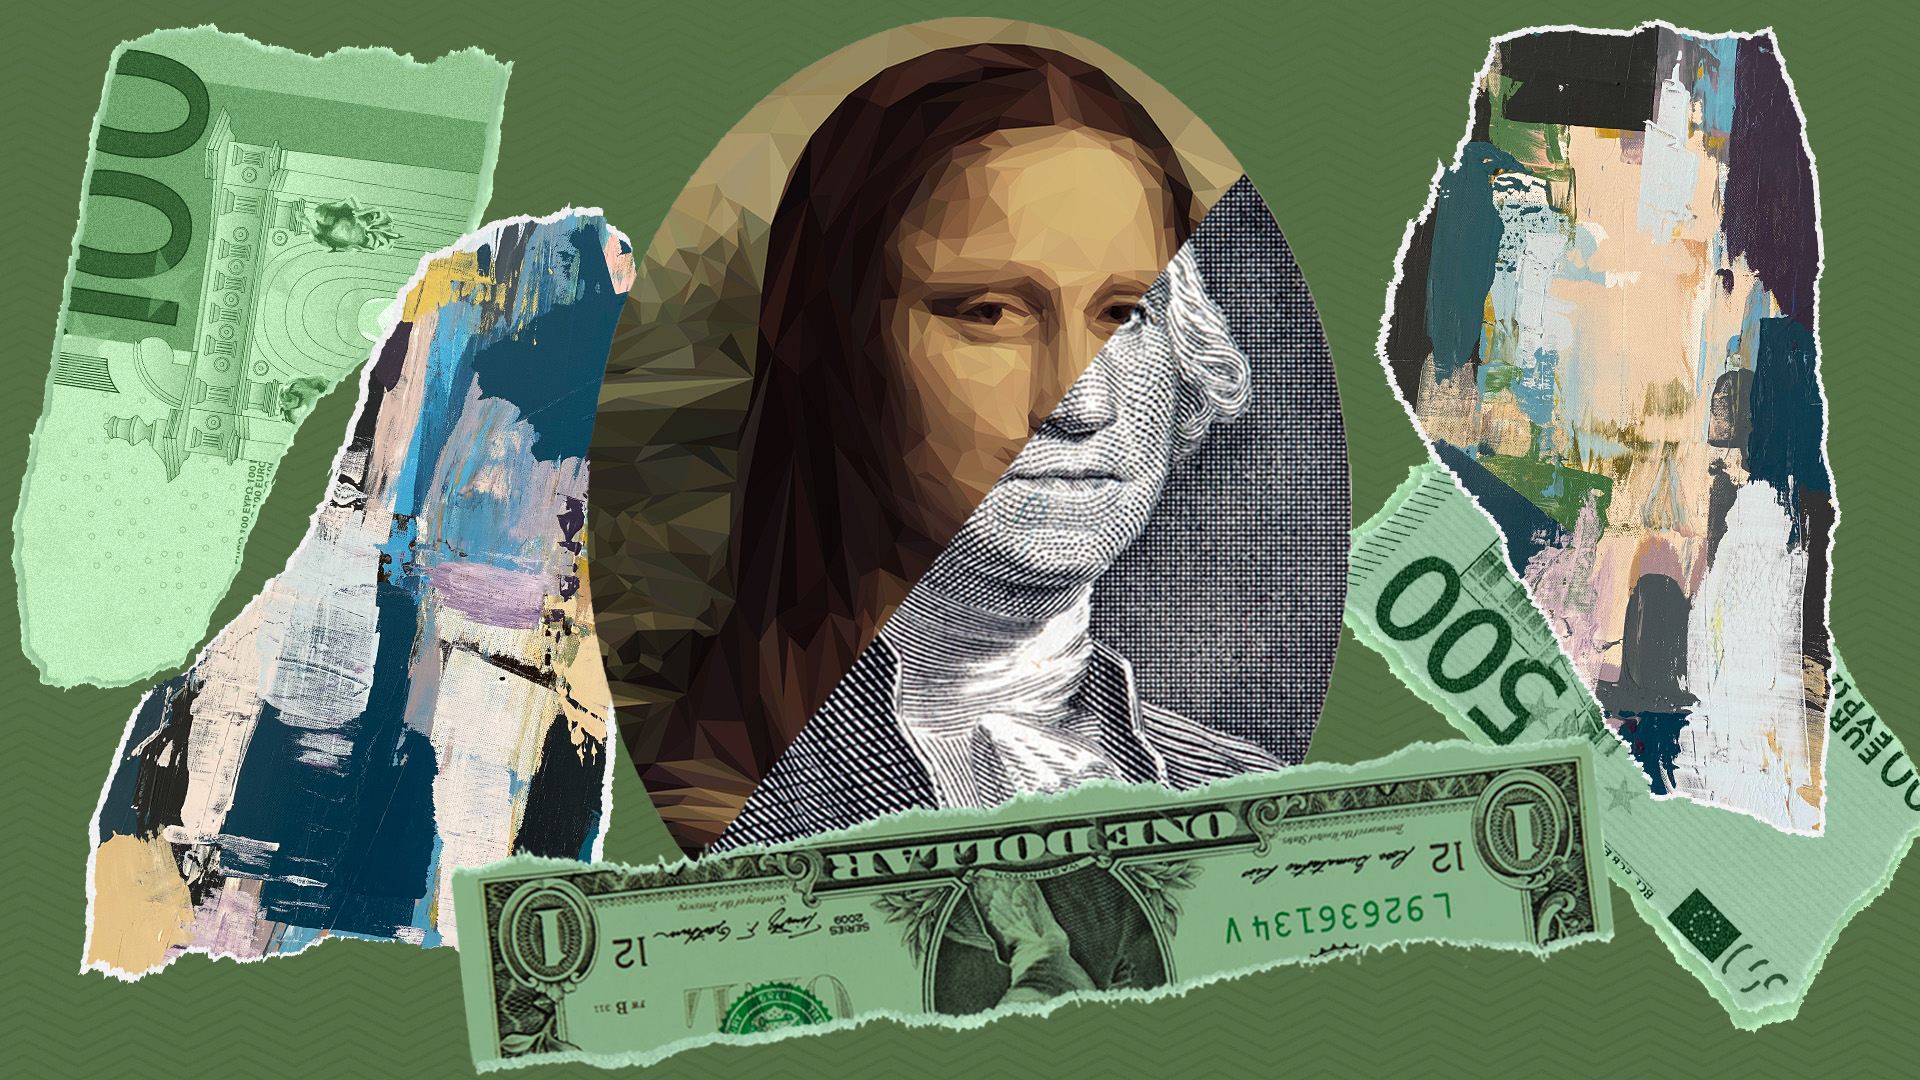 Illustrative collage of art and money